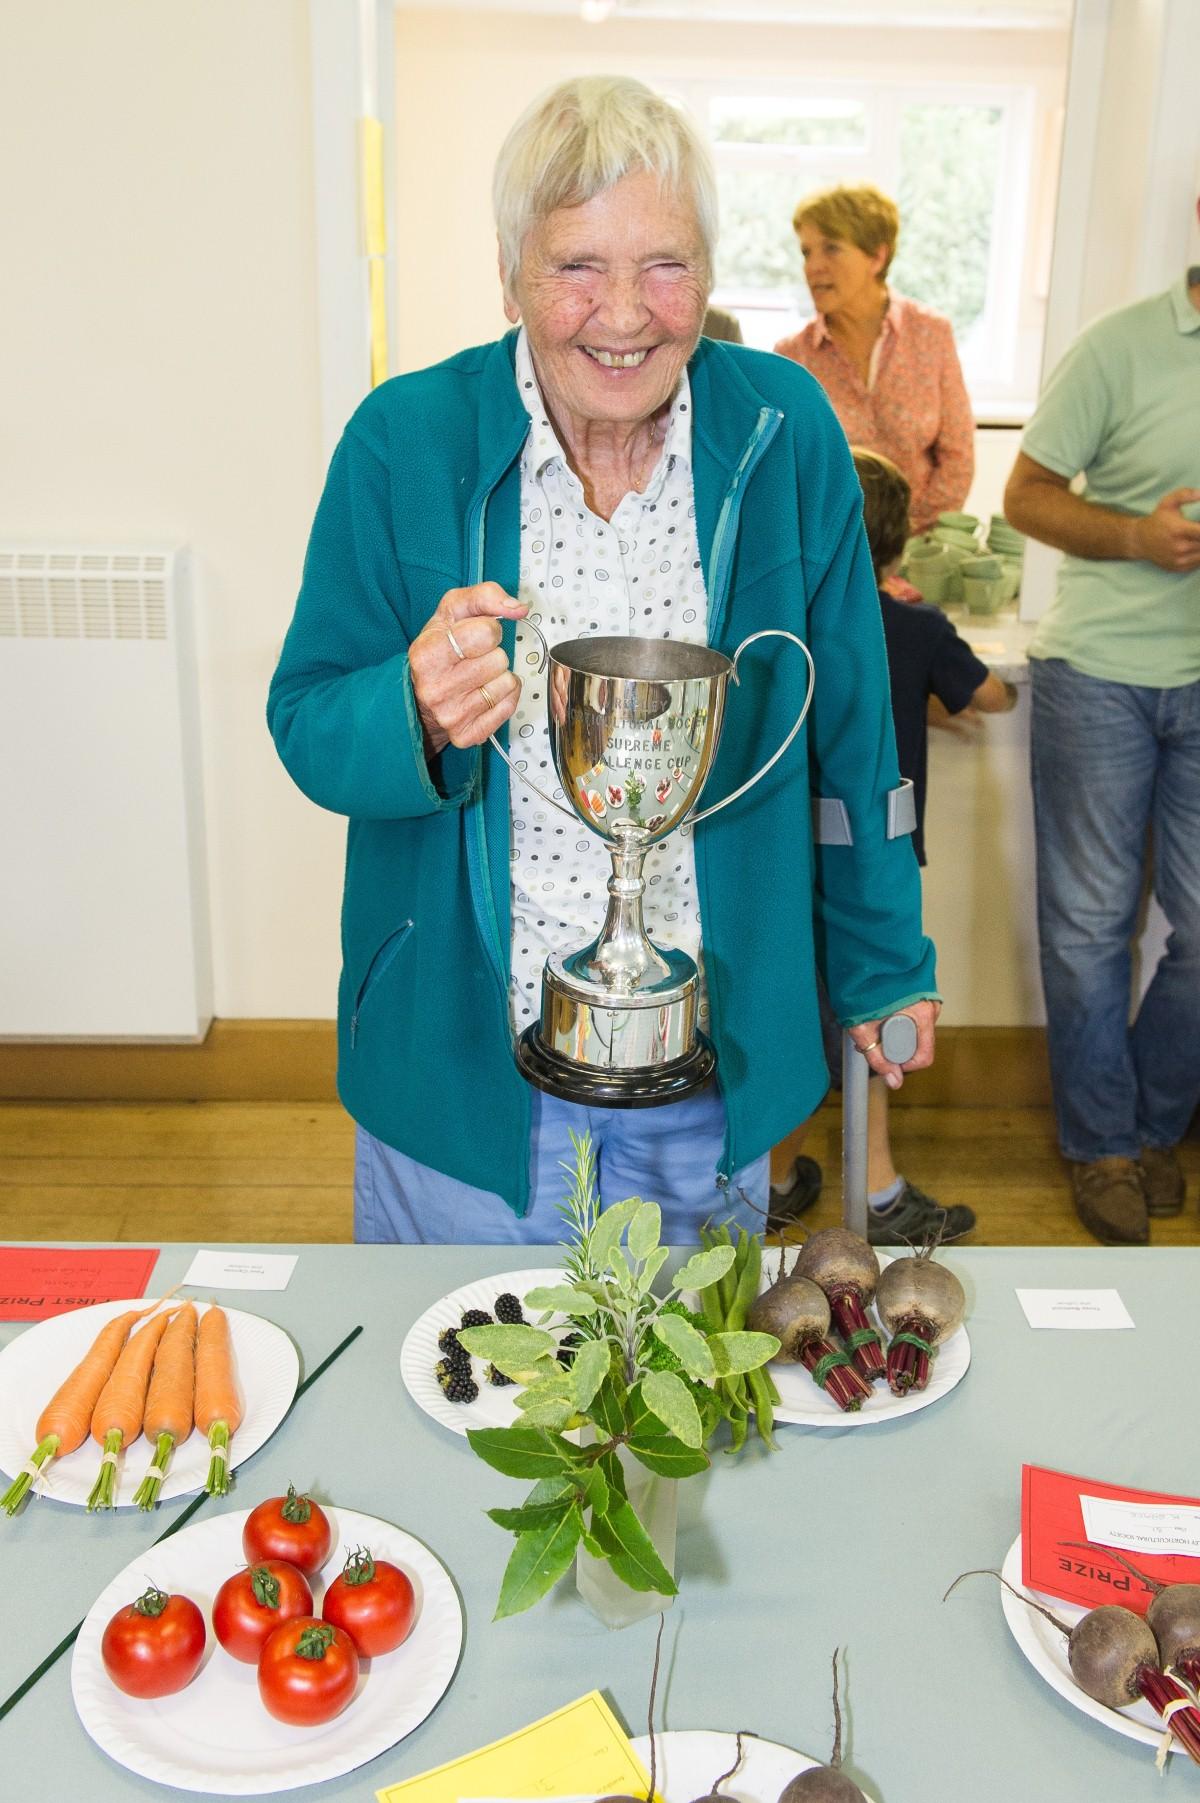 Picture from the Ropley Horticultural Show